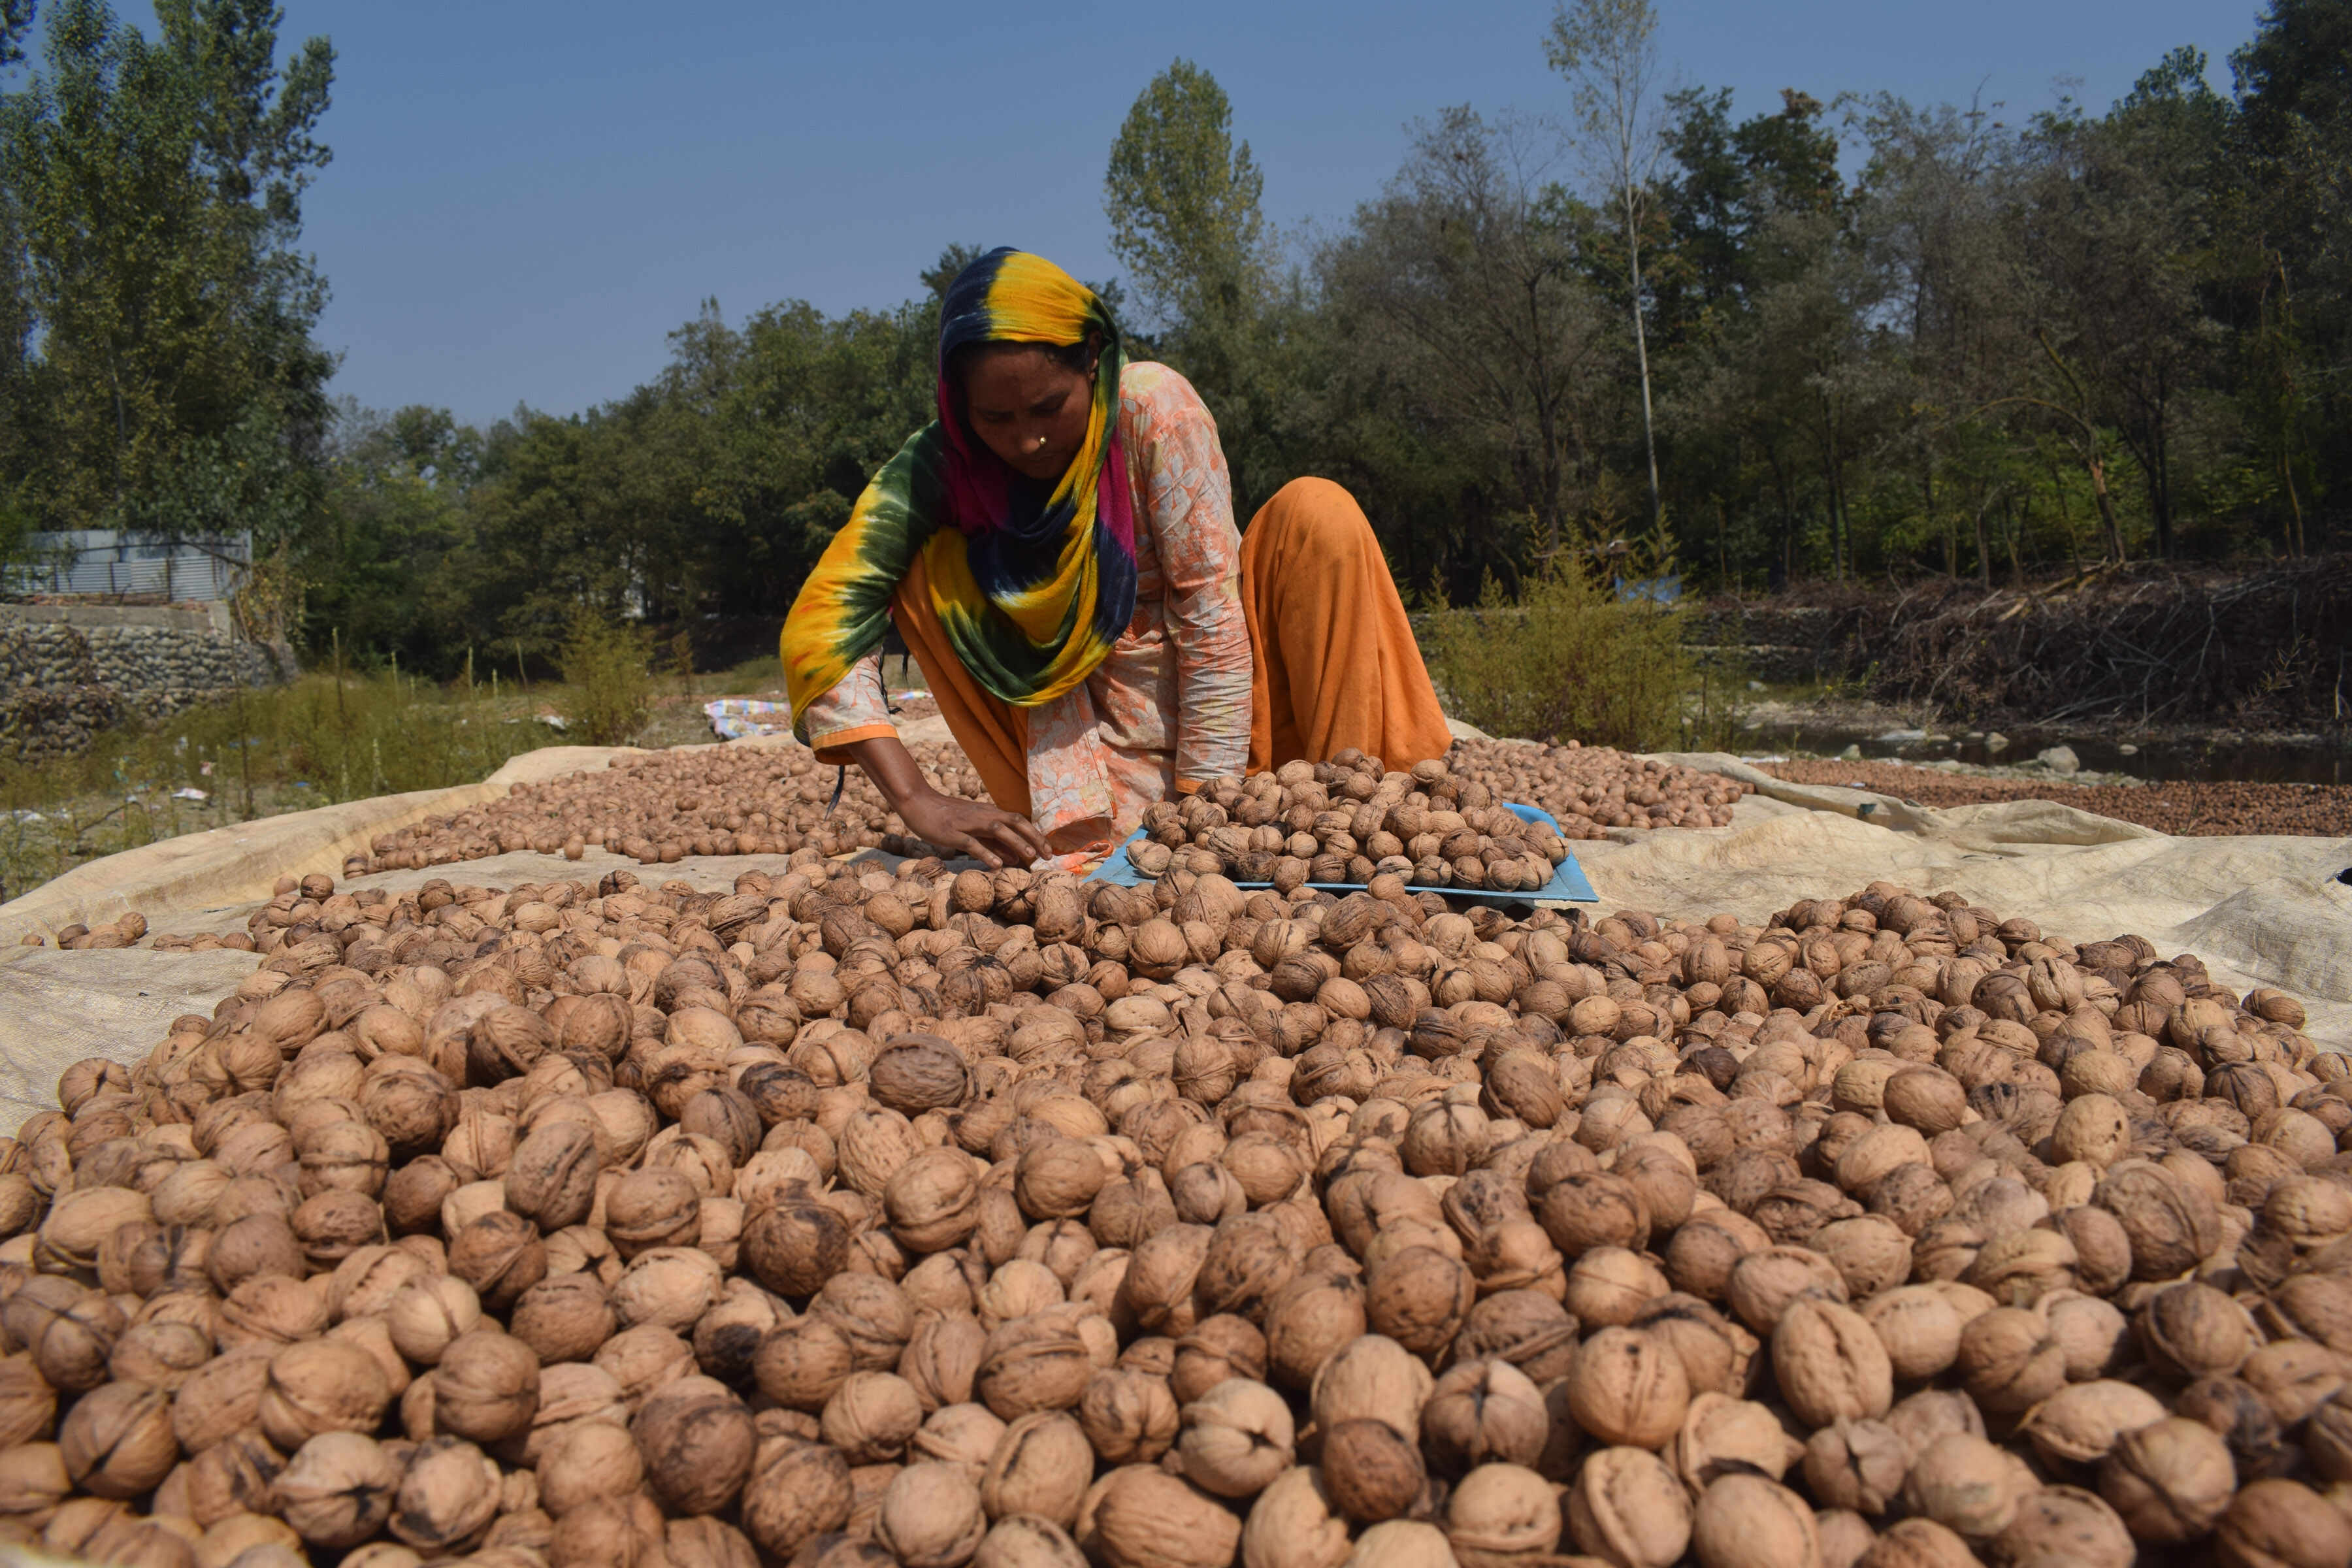 case study on a product walnuts and almonds from kashmir